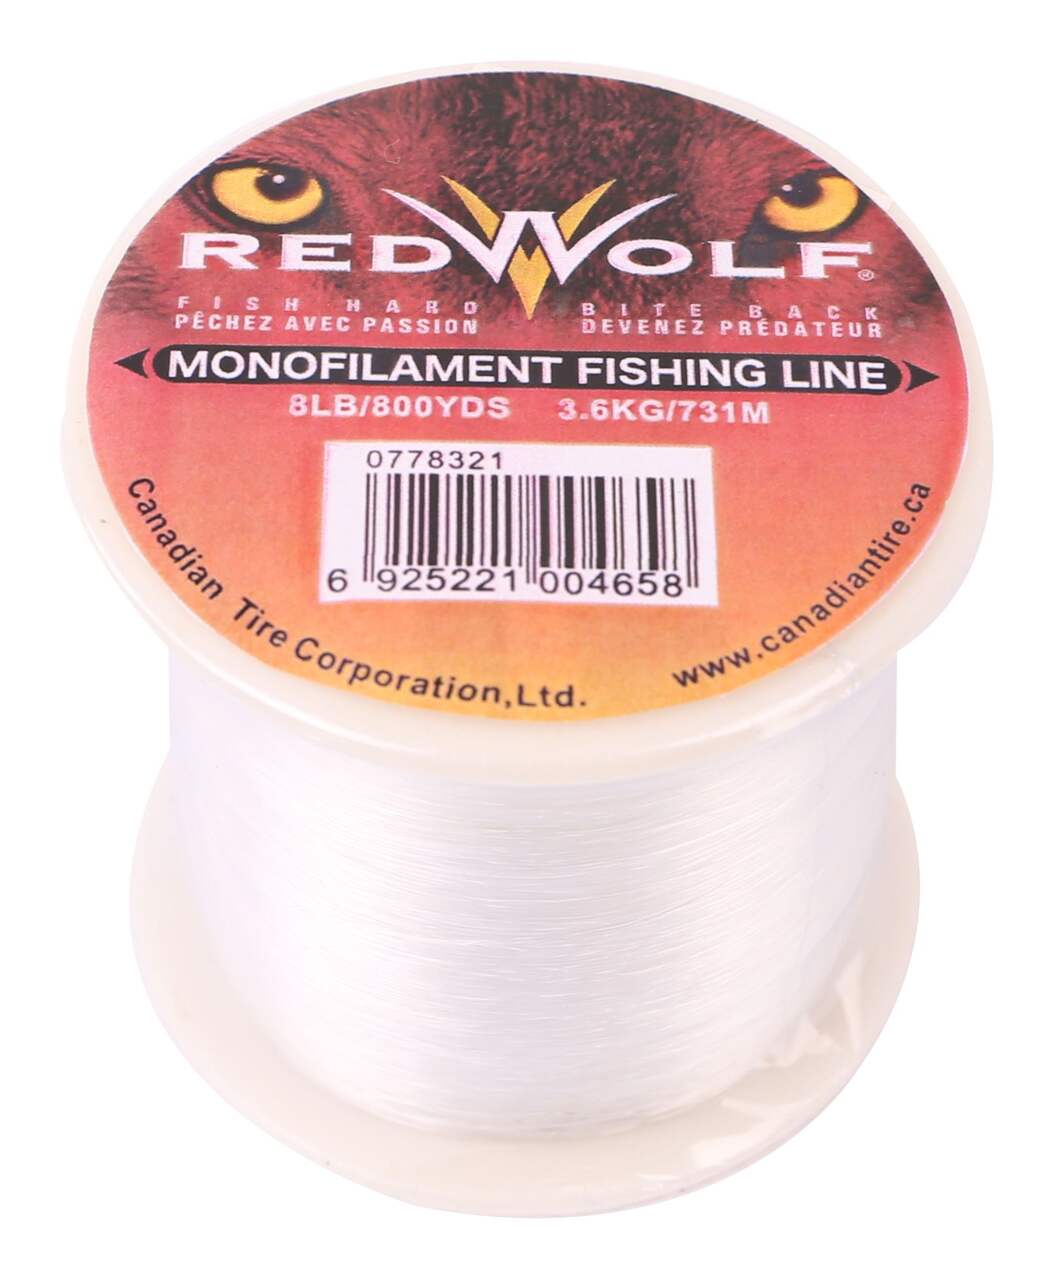 https://media-www.canadiantire.ca/product/playing/fishing/fishing-accessories/0778321/red-wolf-monofilament-fishing-line-8-lb-ada5bc87-4542-41f9-ade1-1f24229da5b9-jpgrendition.jpg?imdensity=1&imwidth=640&impolicy=mZoom